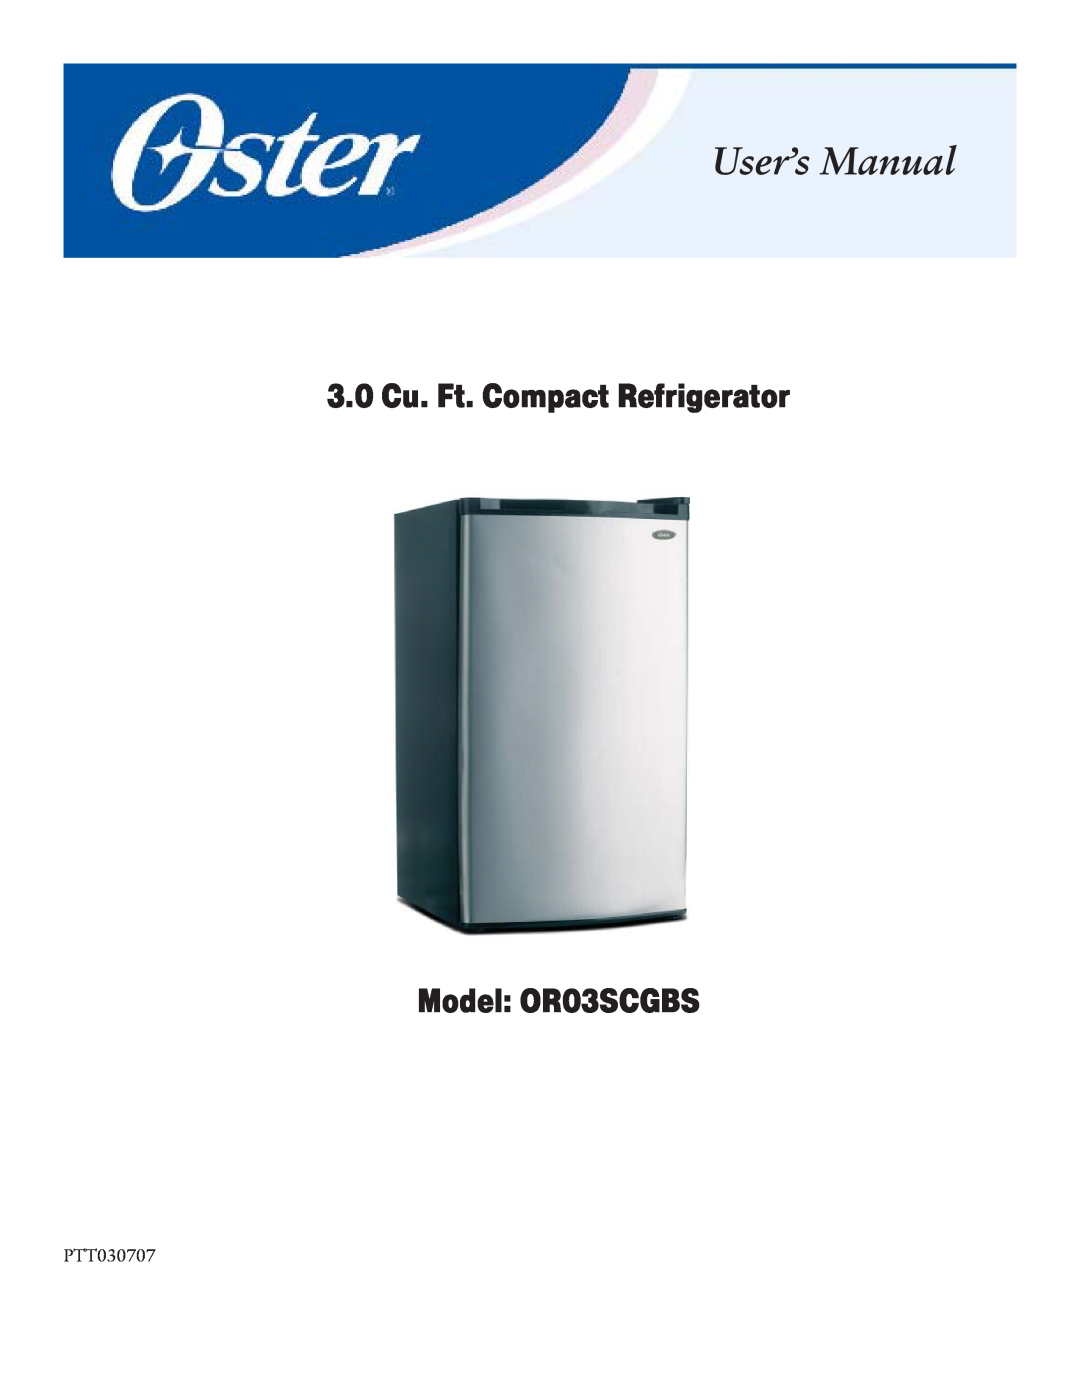 Oster user manual 3.0 Cu. Ft. Compact Refrigerator Model OR03SCGBS, PTT030707 